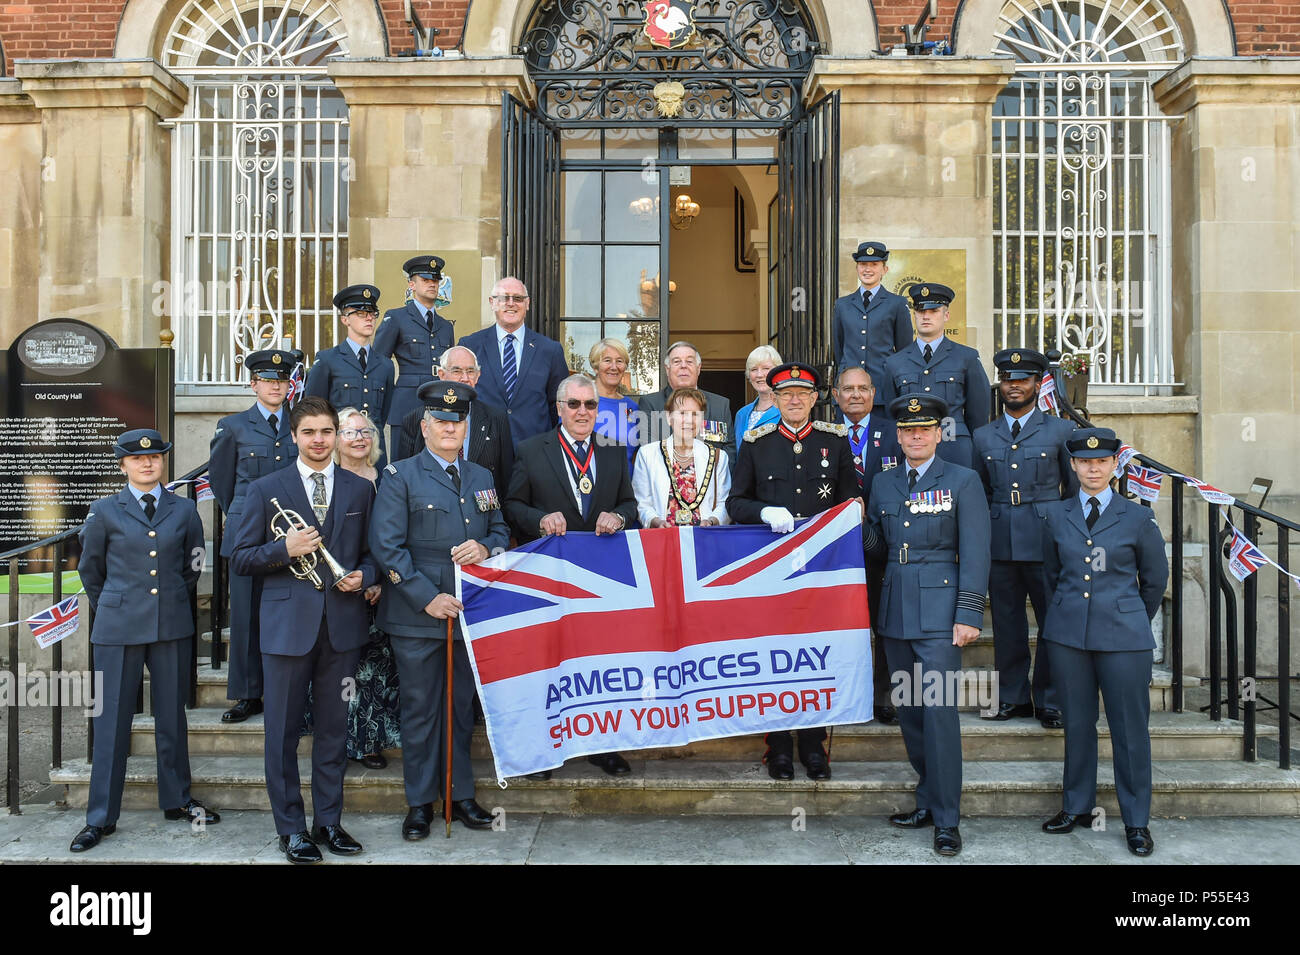 Aylesbury, United Kingdom. 25 June 2018. Earlier today Chairman Netta  Glover was joined by County Councillors, Deputy Lieutenants, RAF personnel  and other civic dignitaries in Market Square in the presence of Sir